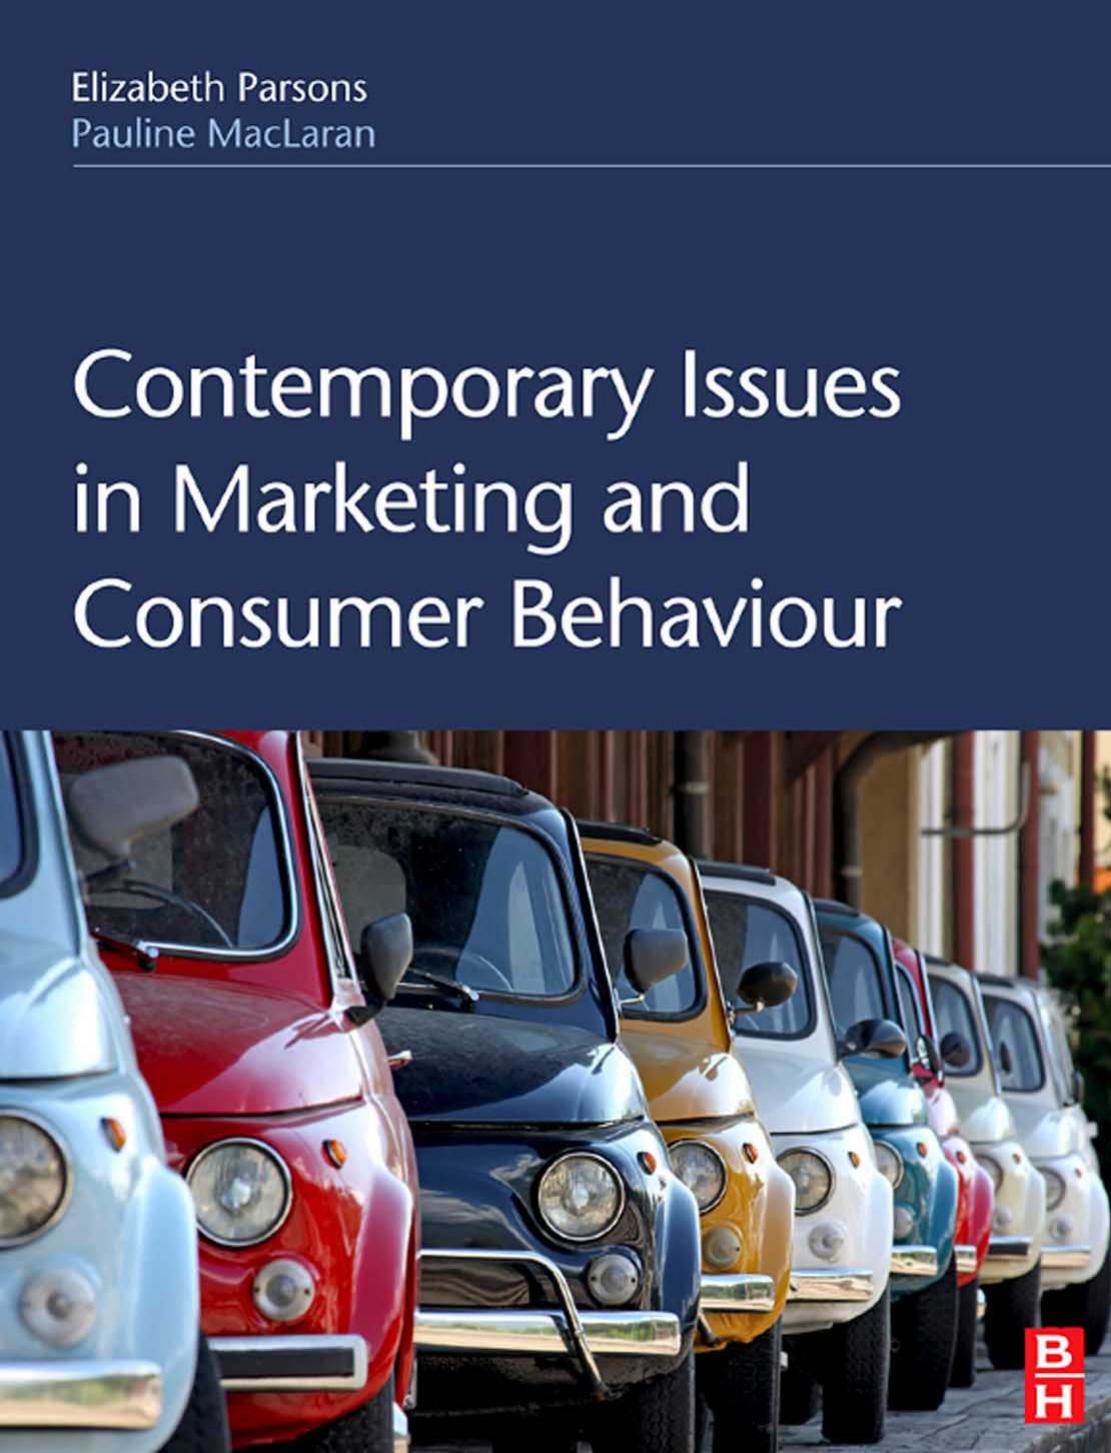 Contemporary Issues in Marketing and Consumer Behaviour.jpg